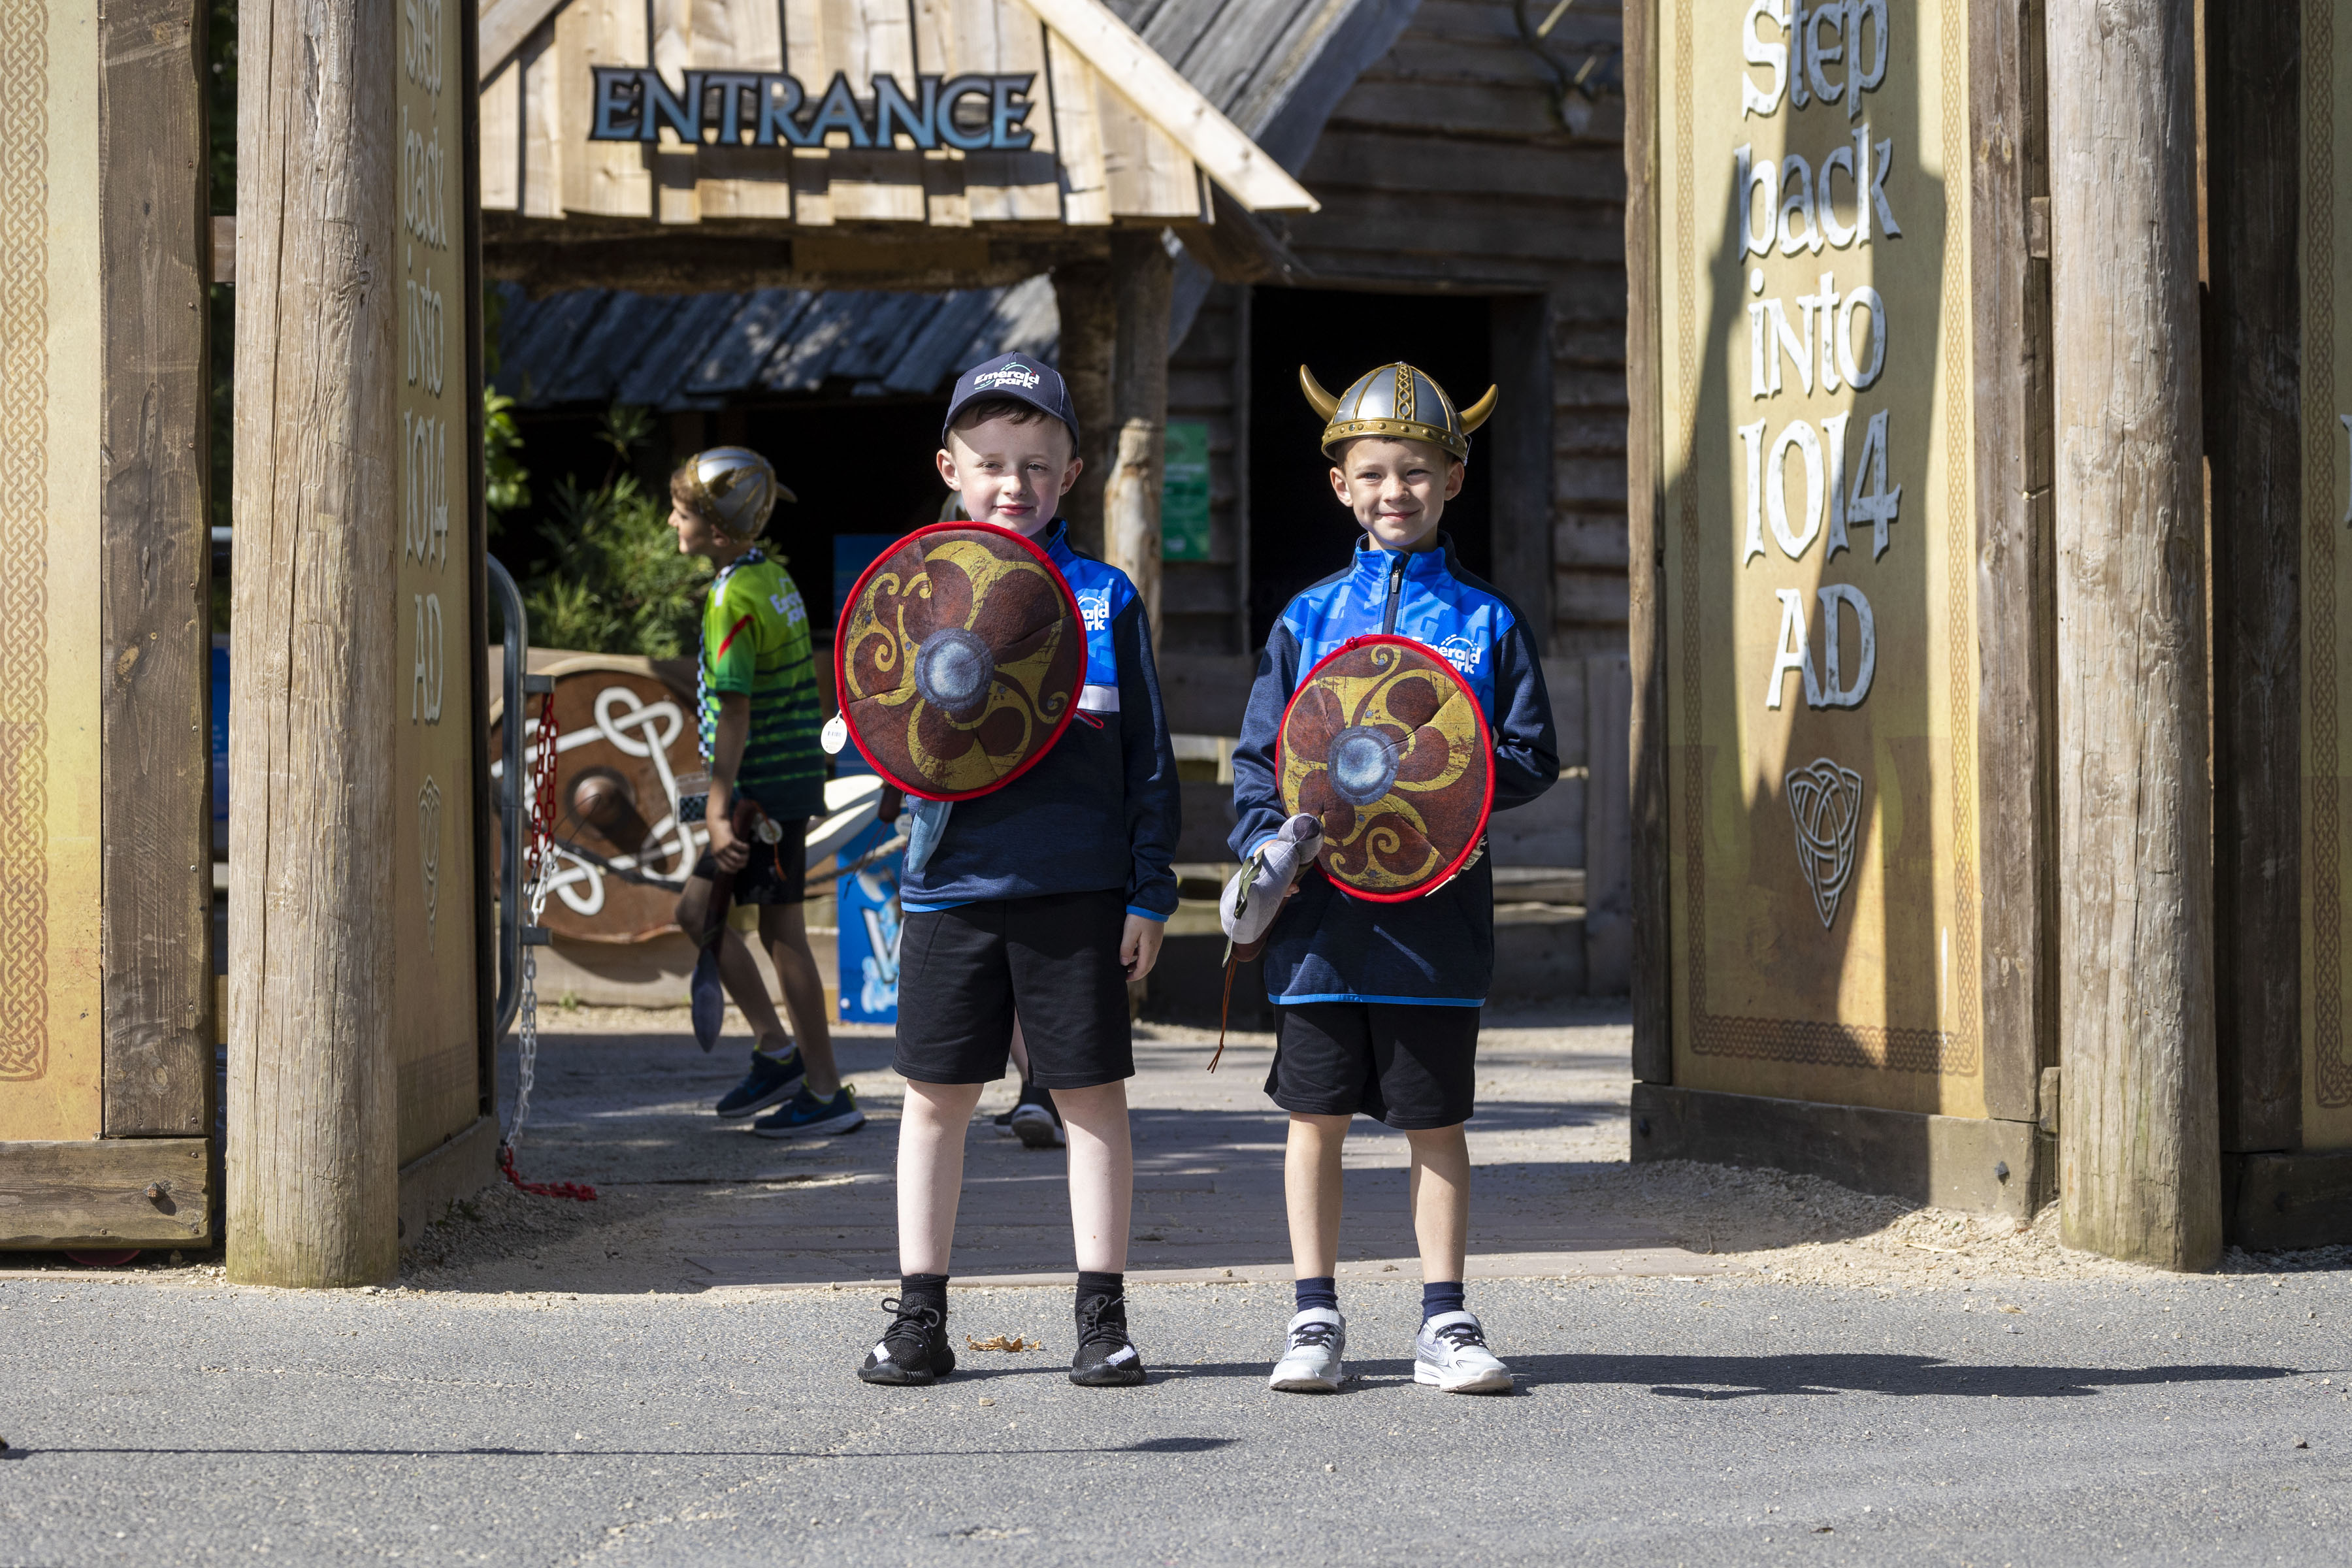 two young boys dressed up as Vikings